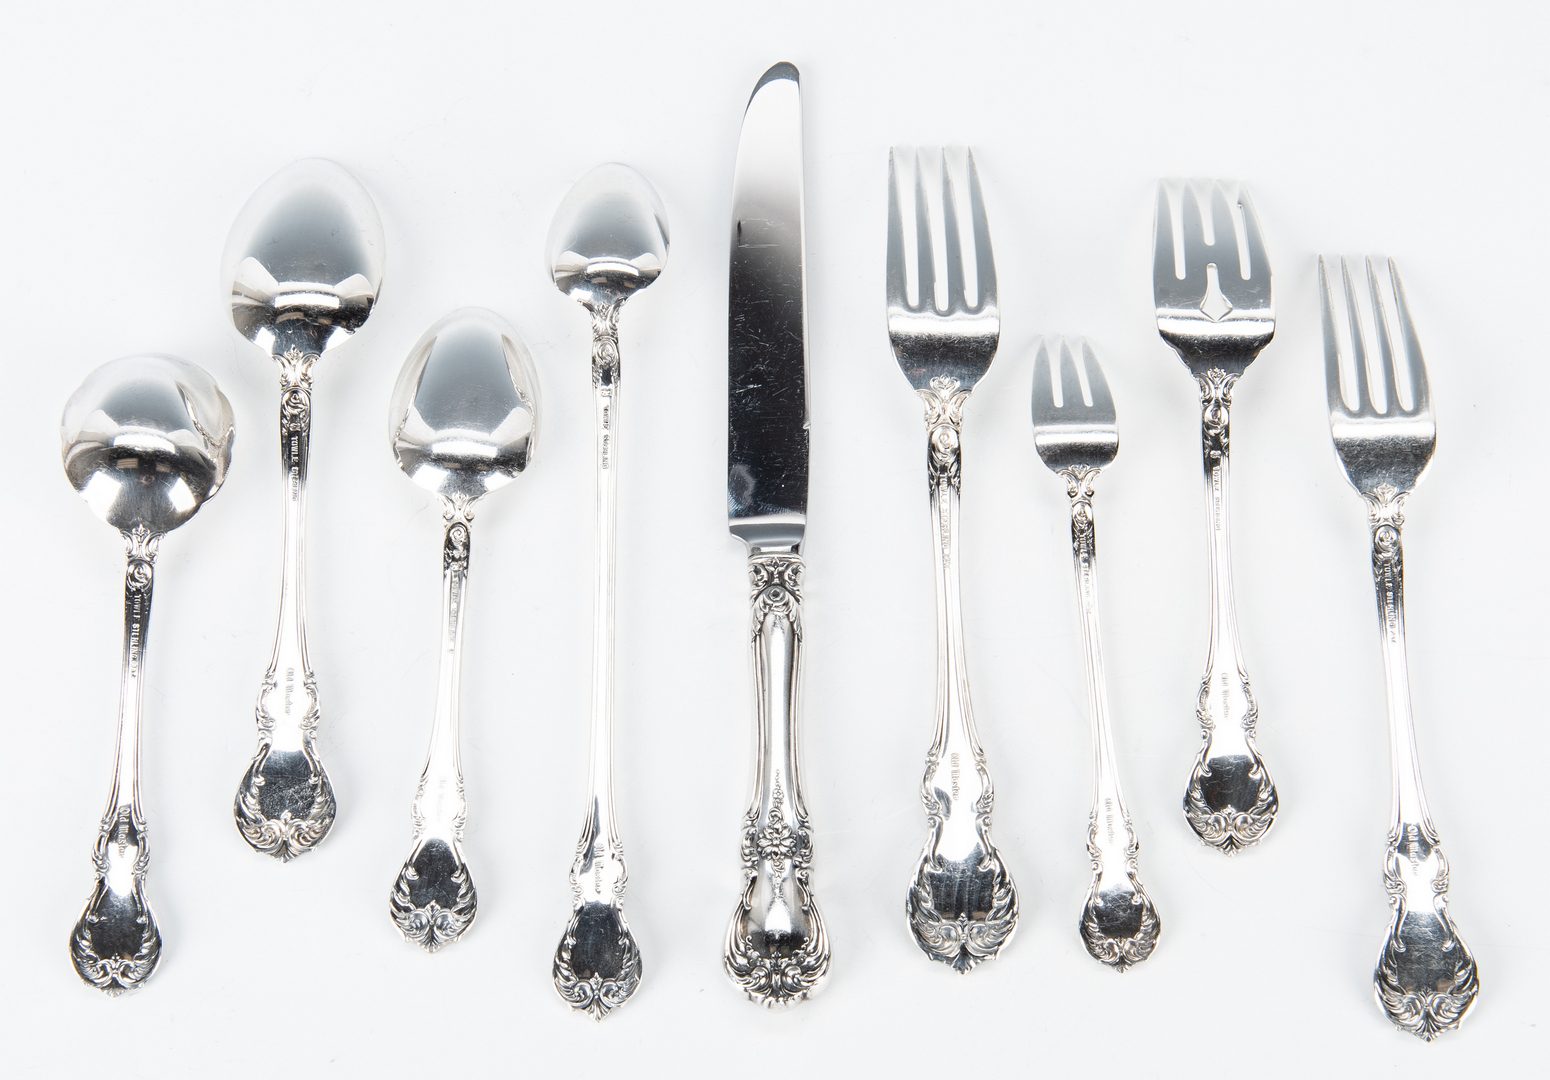 Lot 857: 36 pcs. Towle Old Master Sterling Flatware